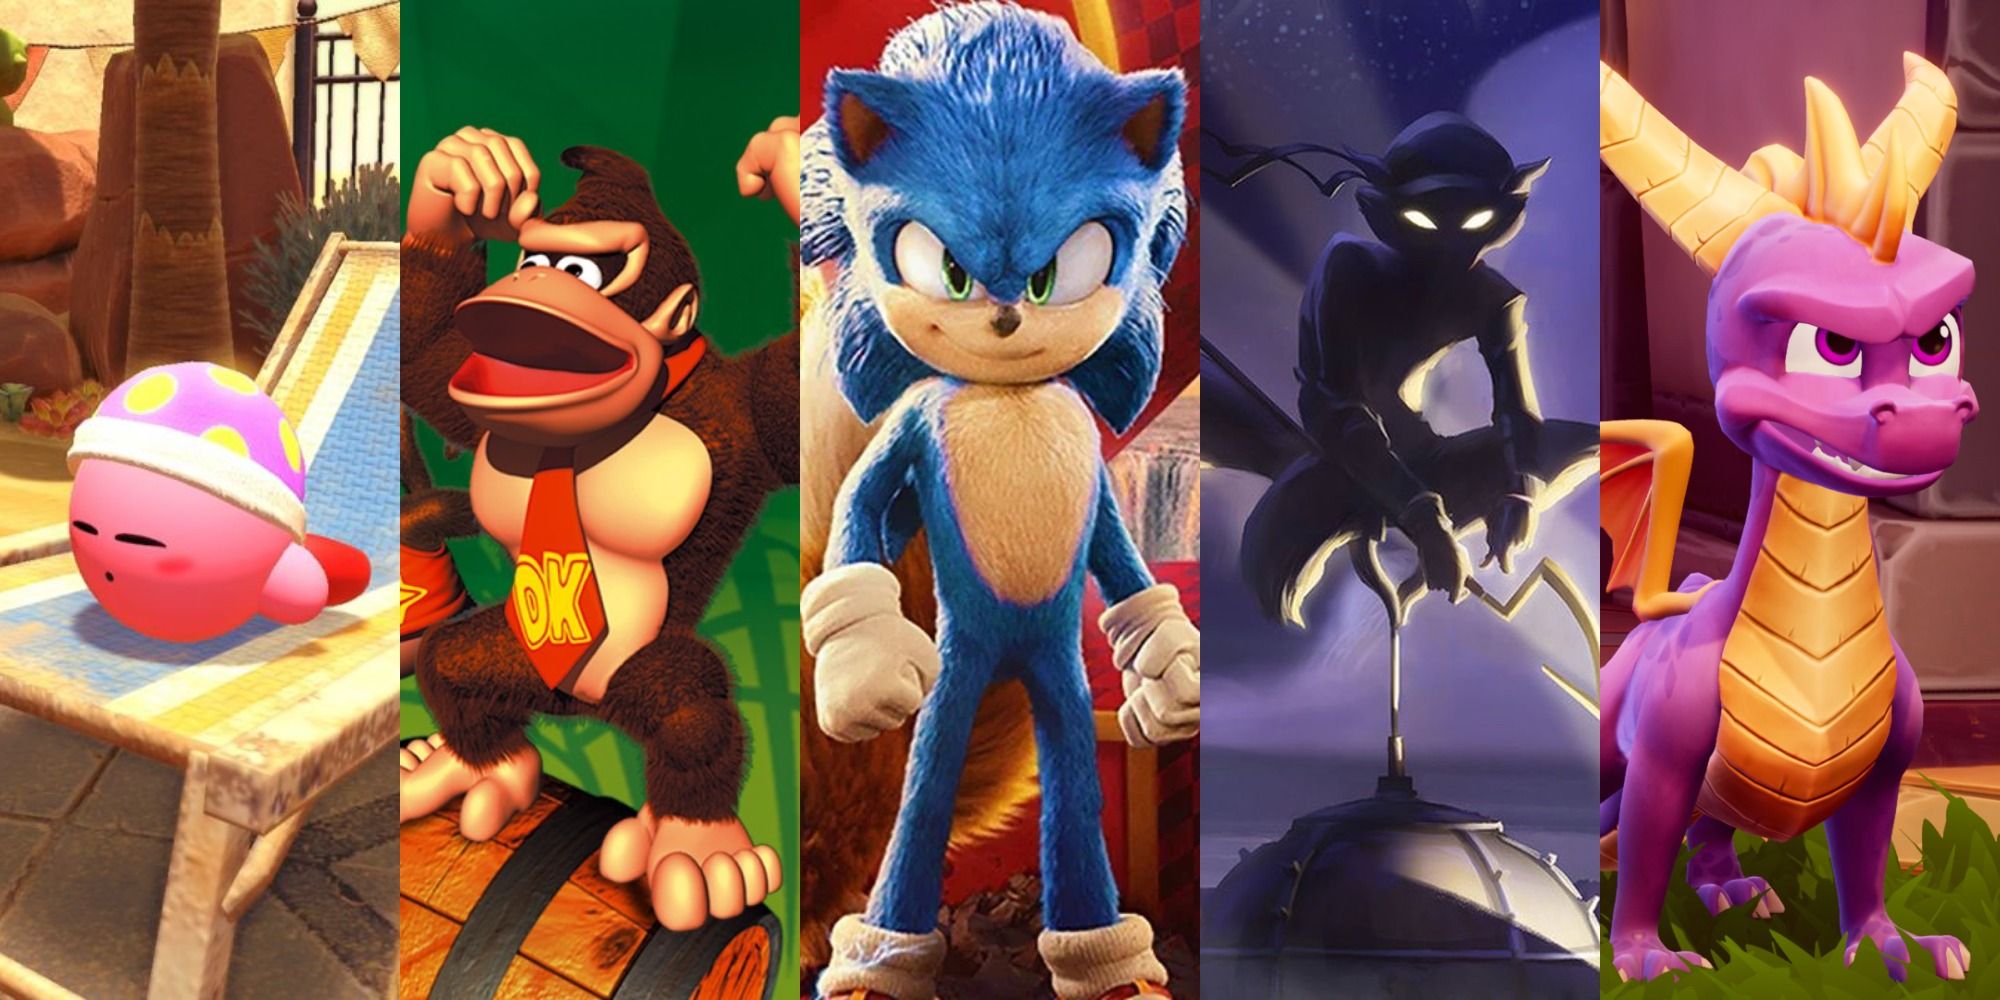 Kirby, Donkey Kong, Sonic, Sly Cooper, and Spyro.